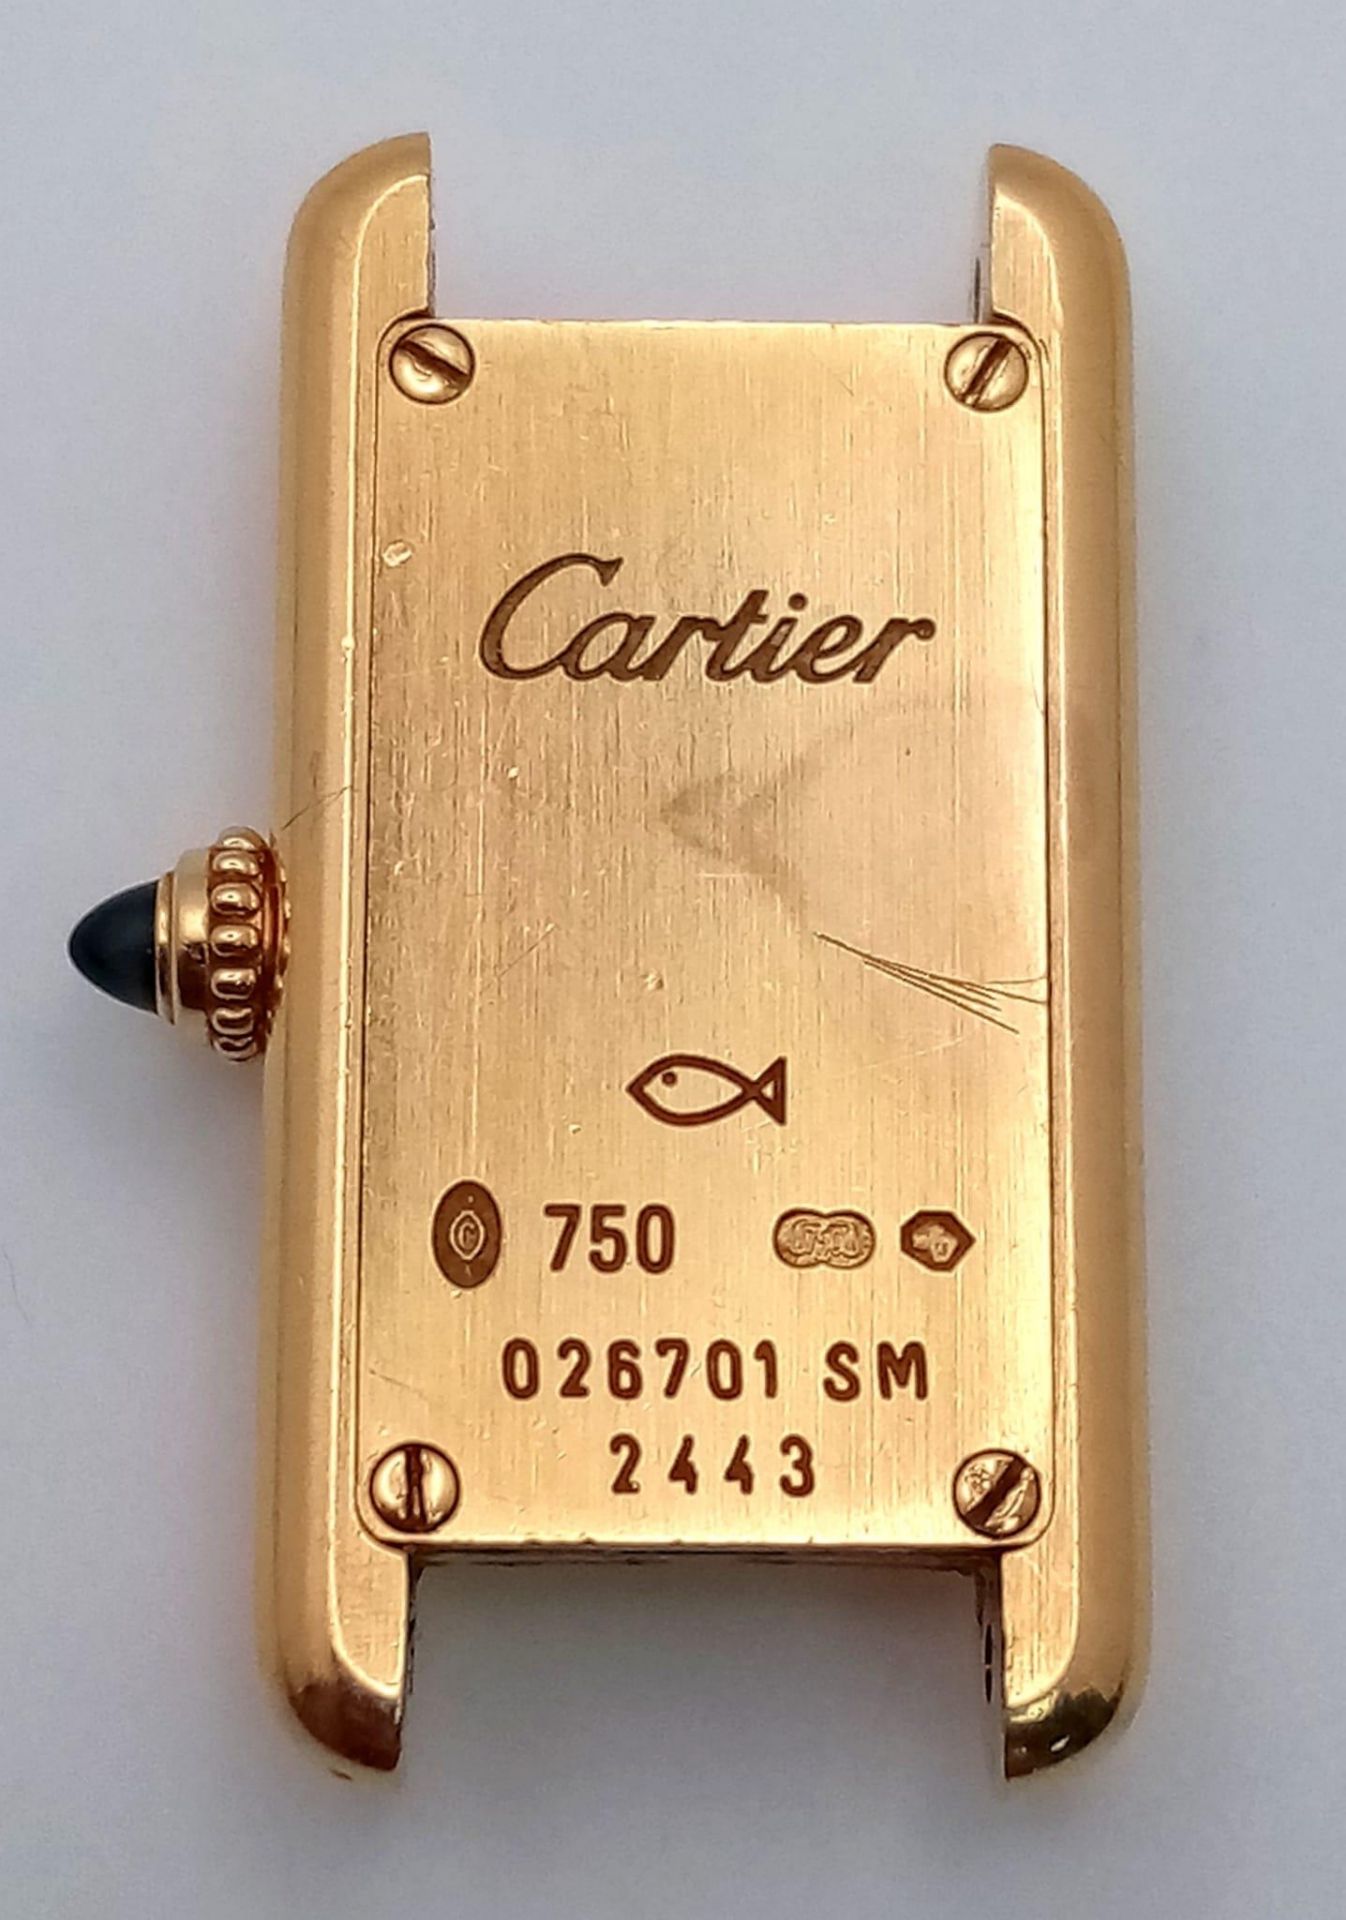 A Vintage 18K Gold Cartier Mini Tank Ladies Watch Case. 18k gold case with 2443 and other Cartier - Image 5 of 8